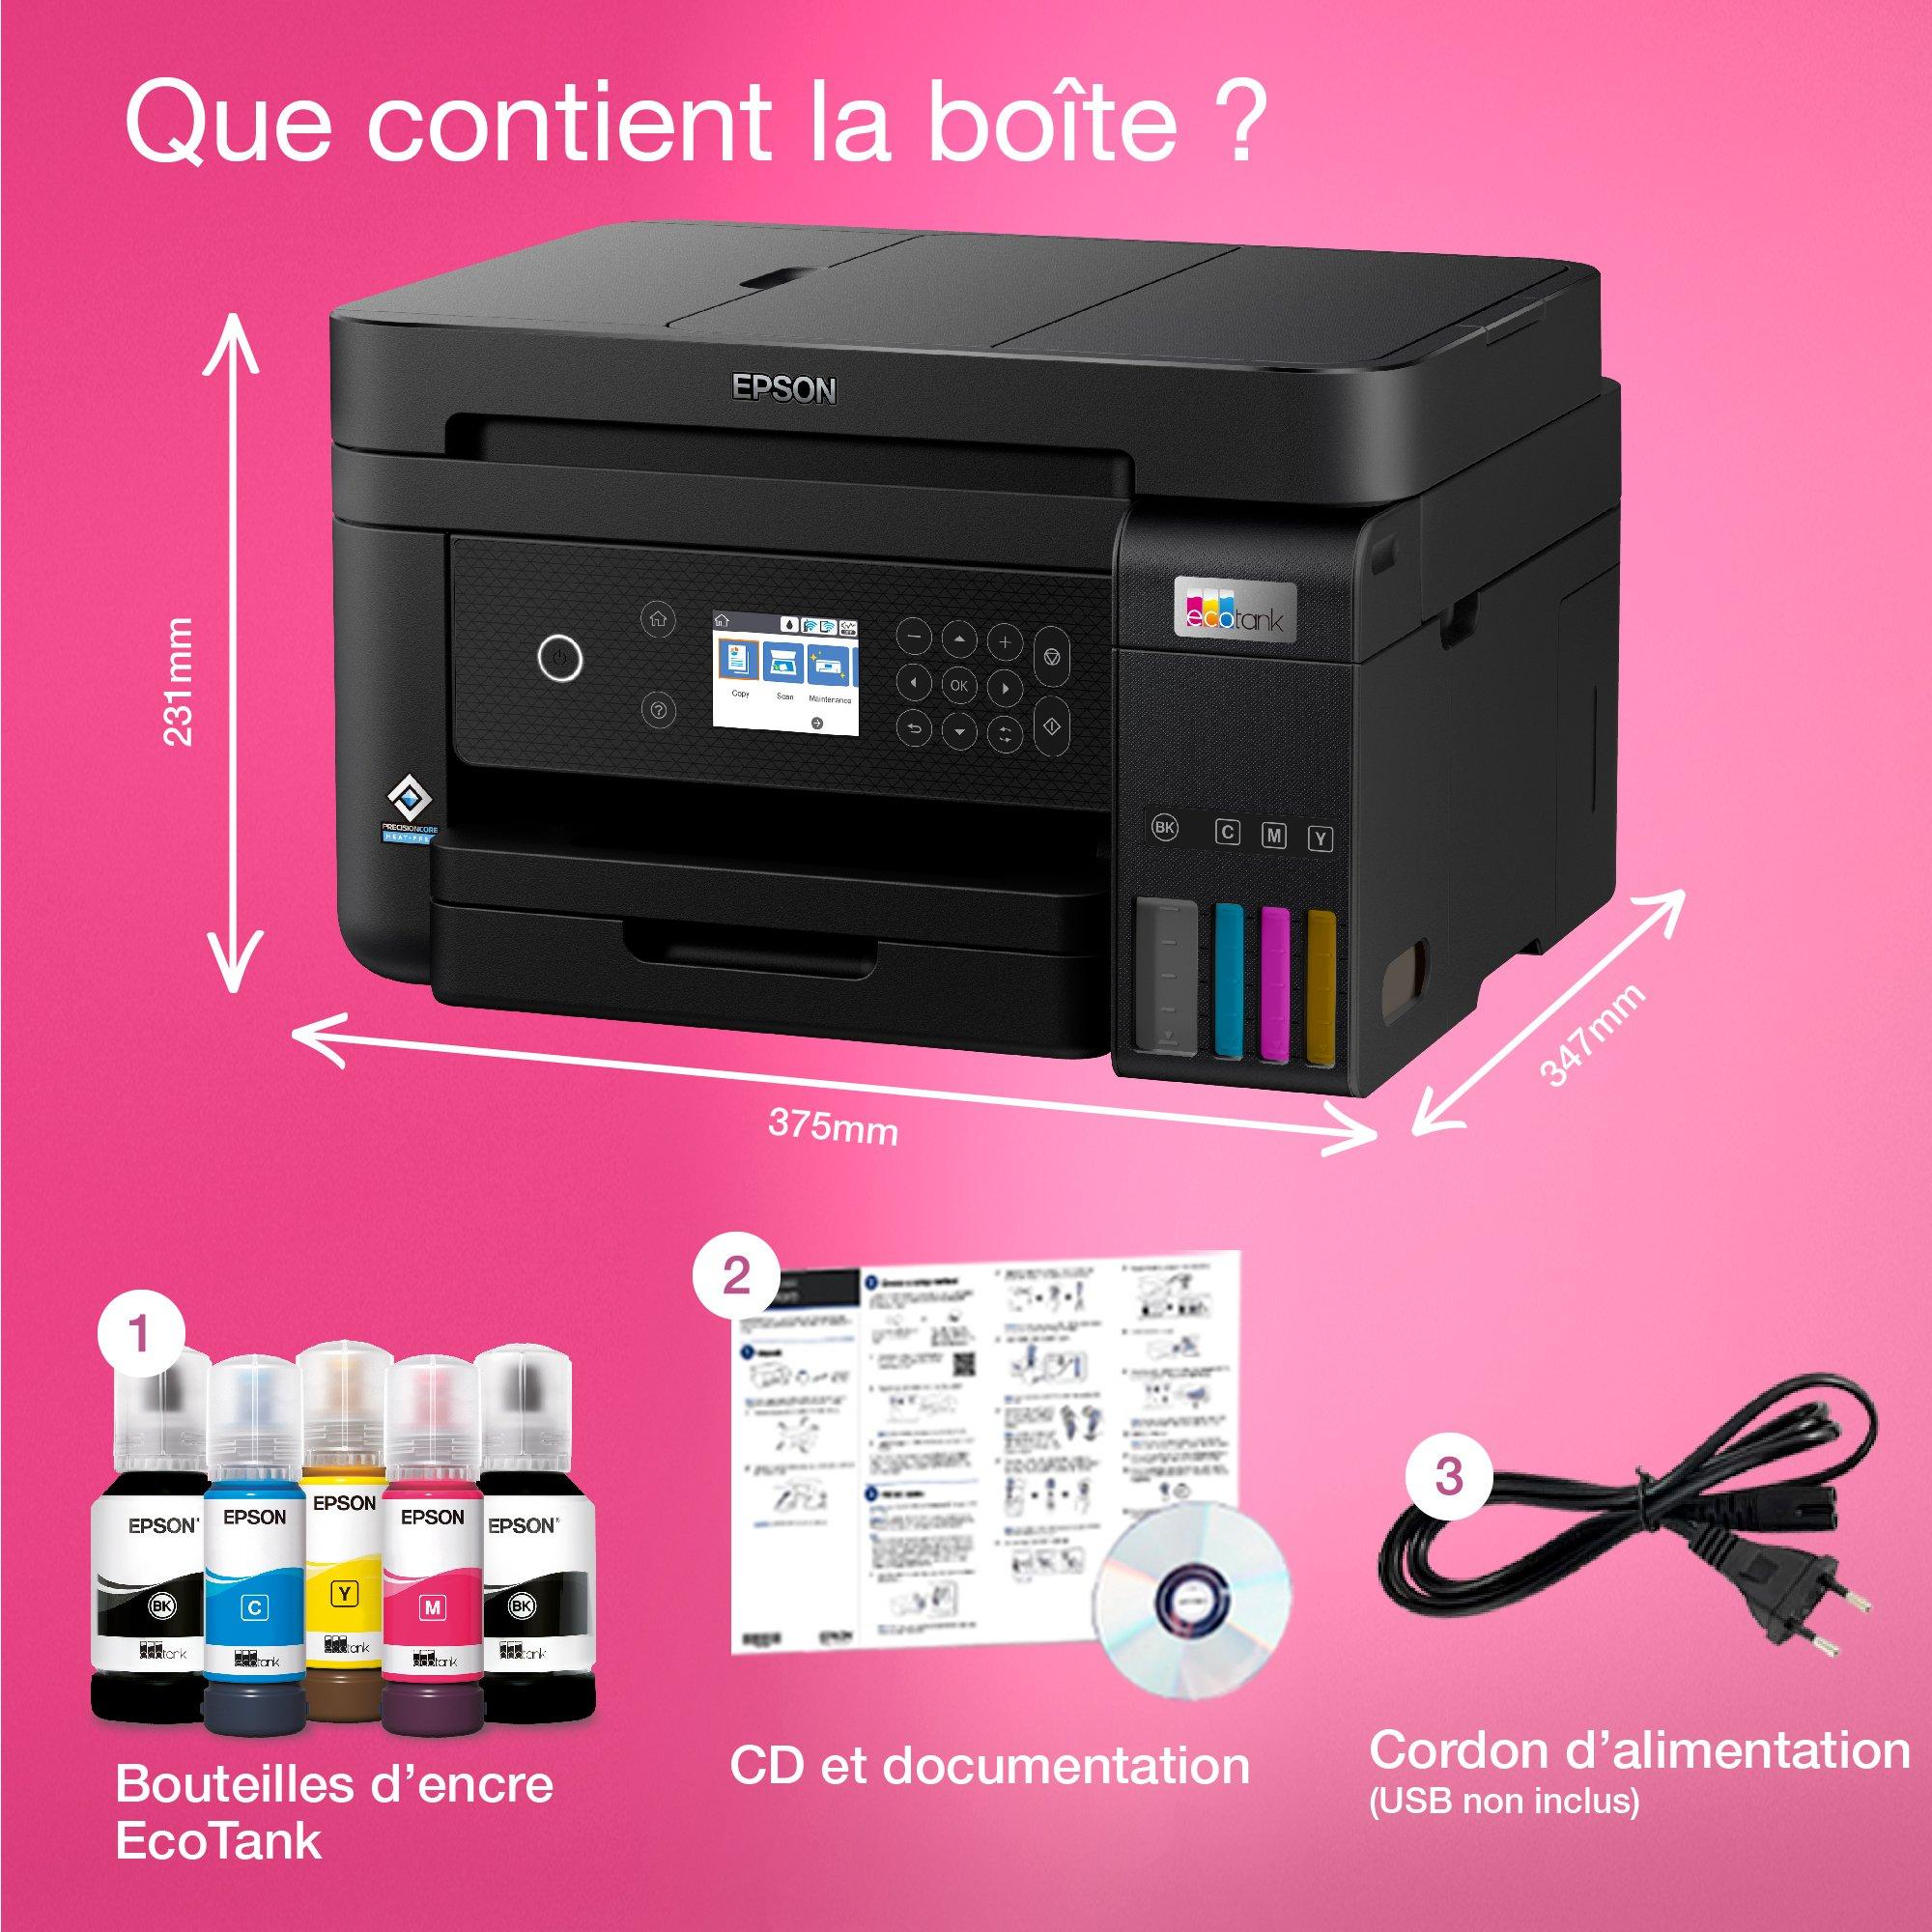 https://i8.amplience.net/i/epsonemear/a17839-productpicture-hires-fr-fr-et-3850-7_dimensions_and_contents_eu_2000x2000?$product-xlarge$&img404=missing_product&v=1